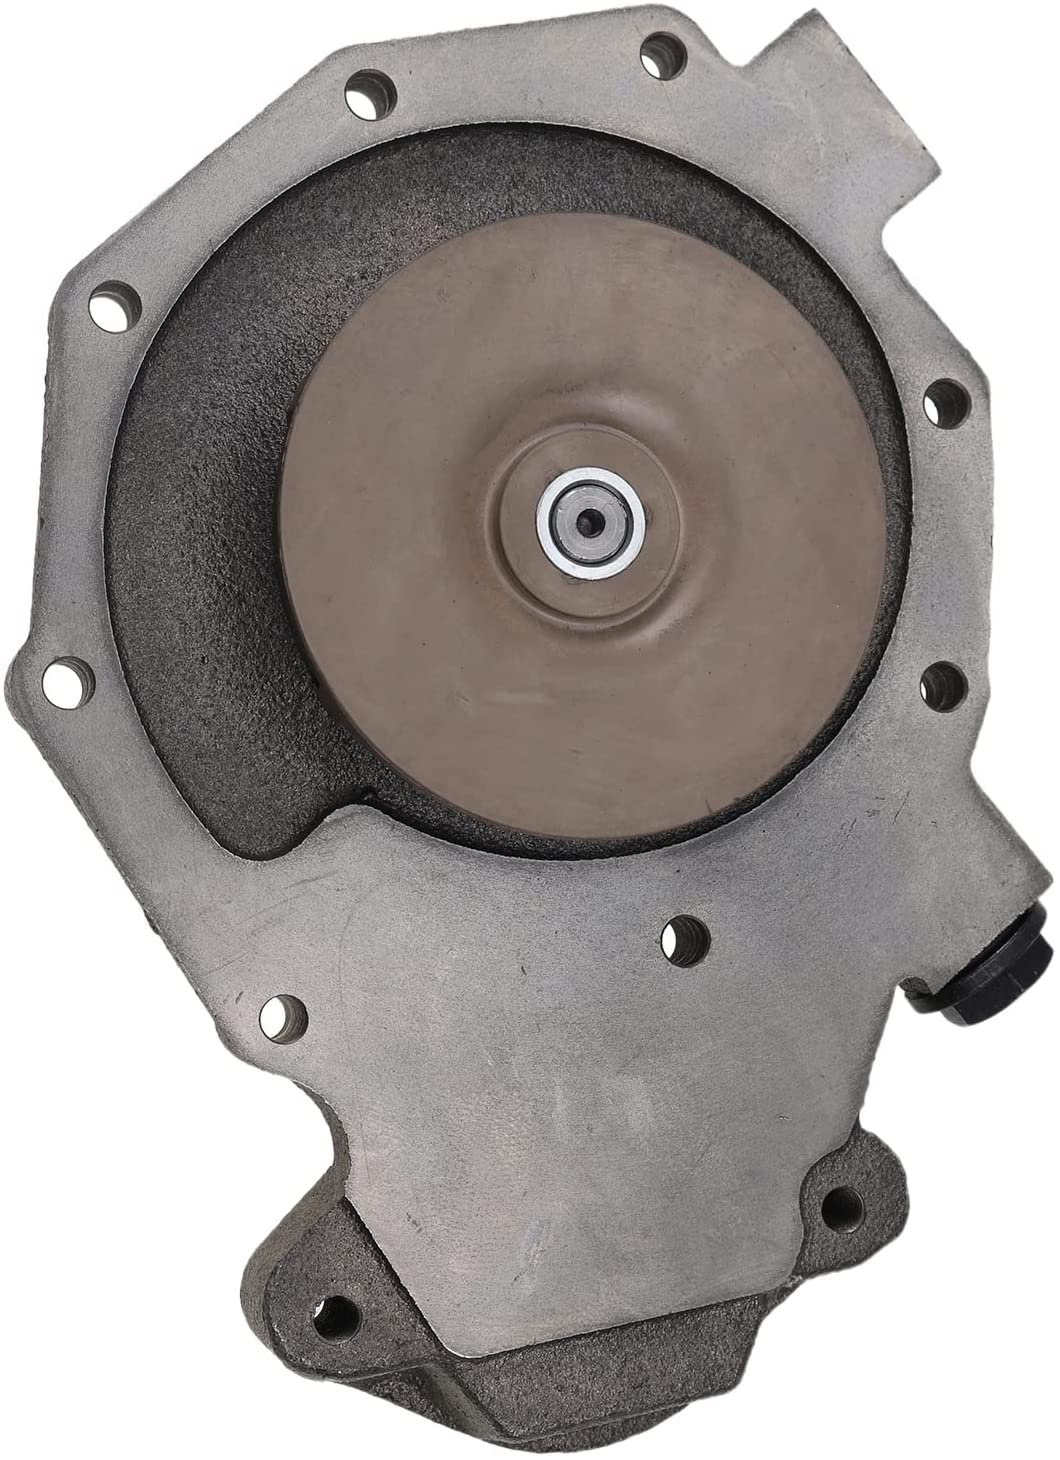 Water Pump RE505981 R503509 with Gaskets for John Deere 310E 310G 310J 310K 310SJ 310SK 315SJ 315SK 325J 325K 325SK 410G 410J 410K 710D 710G 710J Backhoe Loader - KUDUPARTS